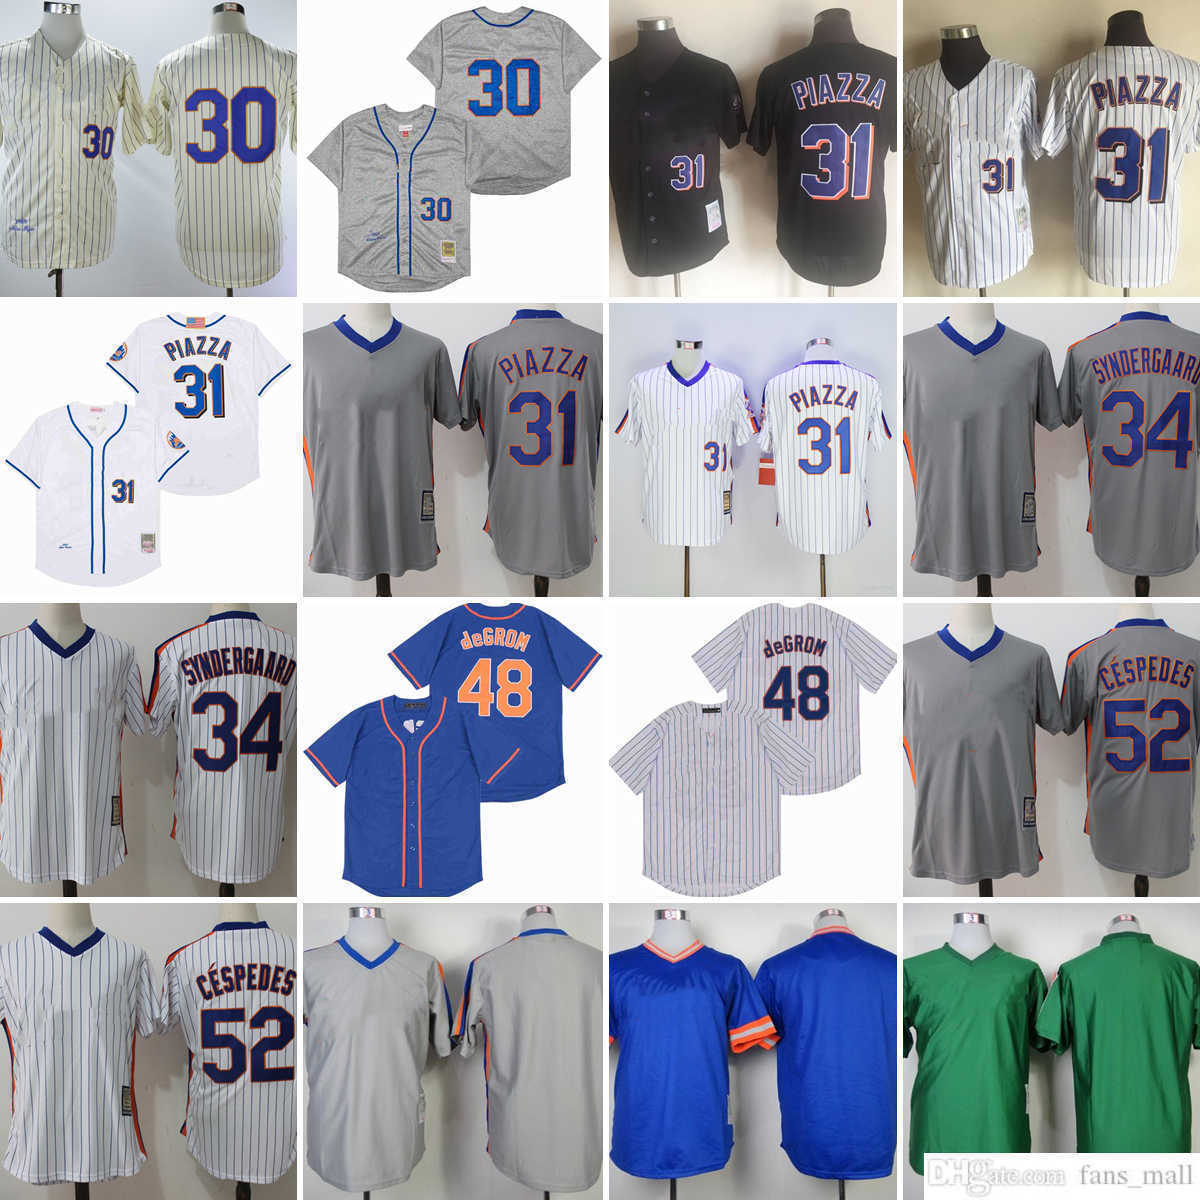 

Vintage College Mitchell and Ness Baseball 31 Mike Piazza Jerseys Stitched 30 Michael Conforto 34 Noah Syndergaard 52 Yoenis Cespedes Gray 1965 Beige Pinstripe 1969, Vintage (with team name)